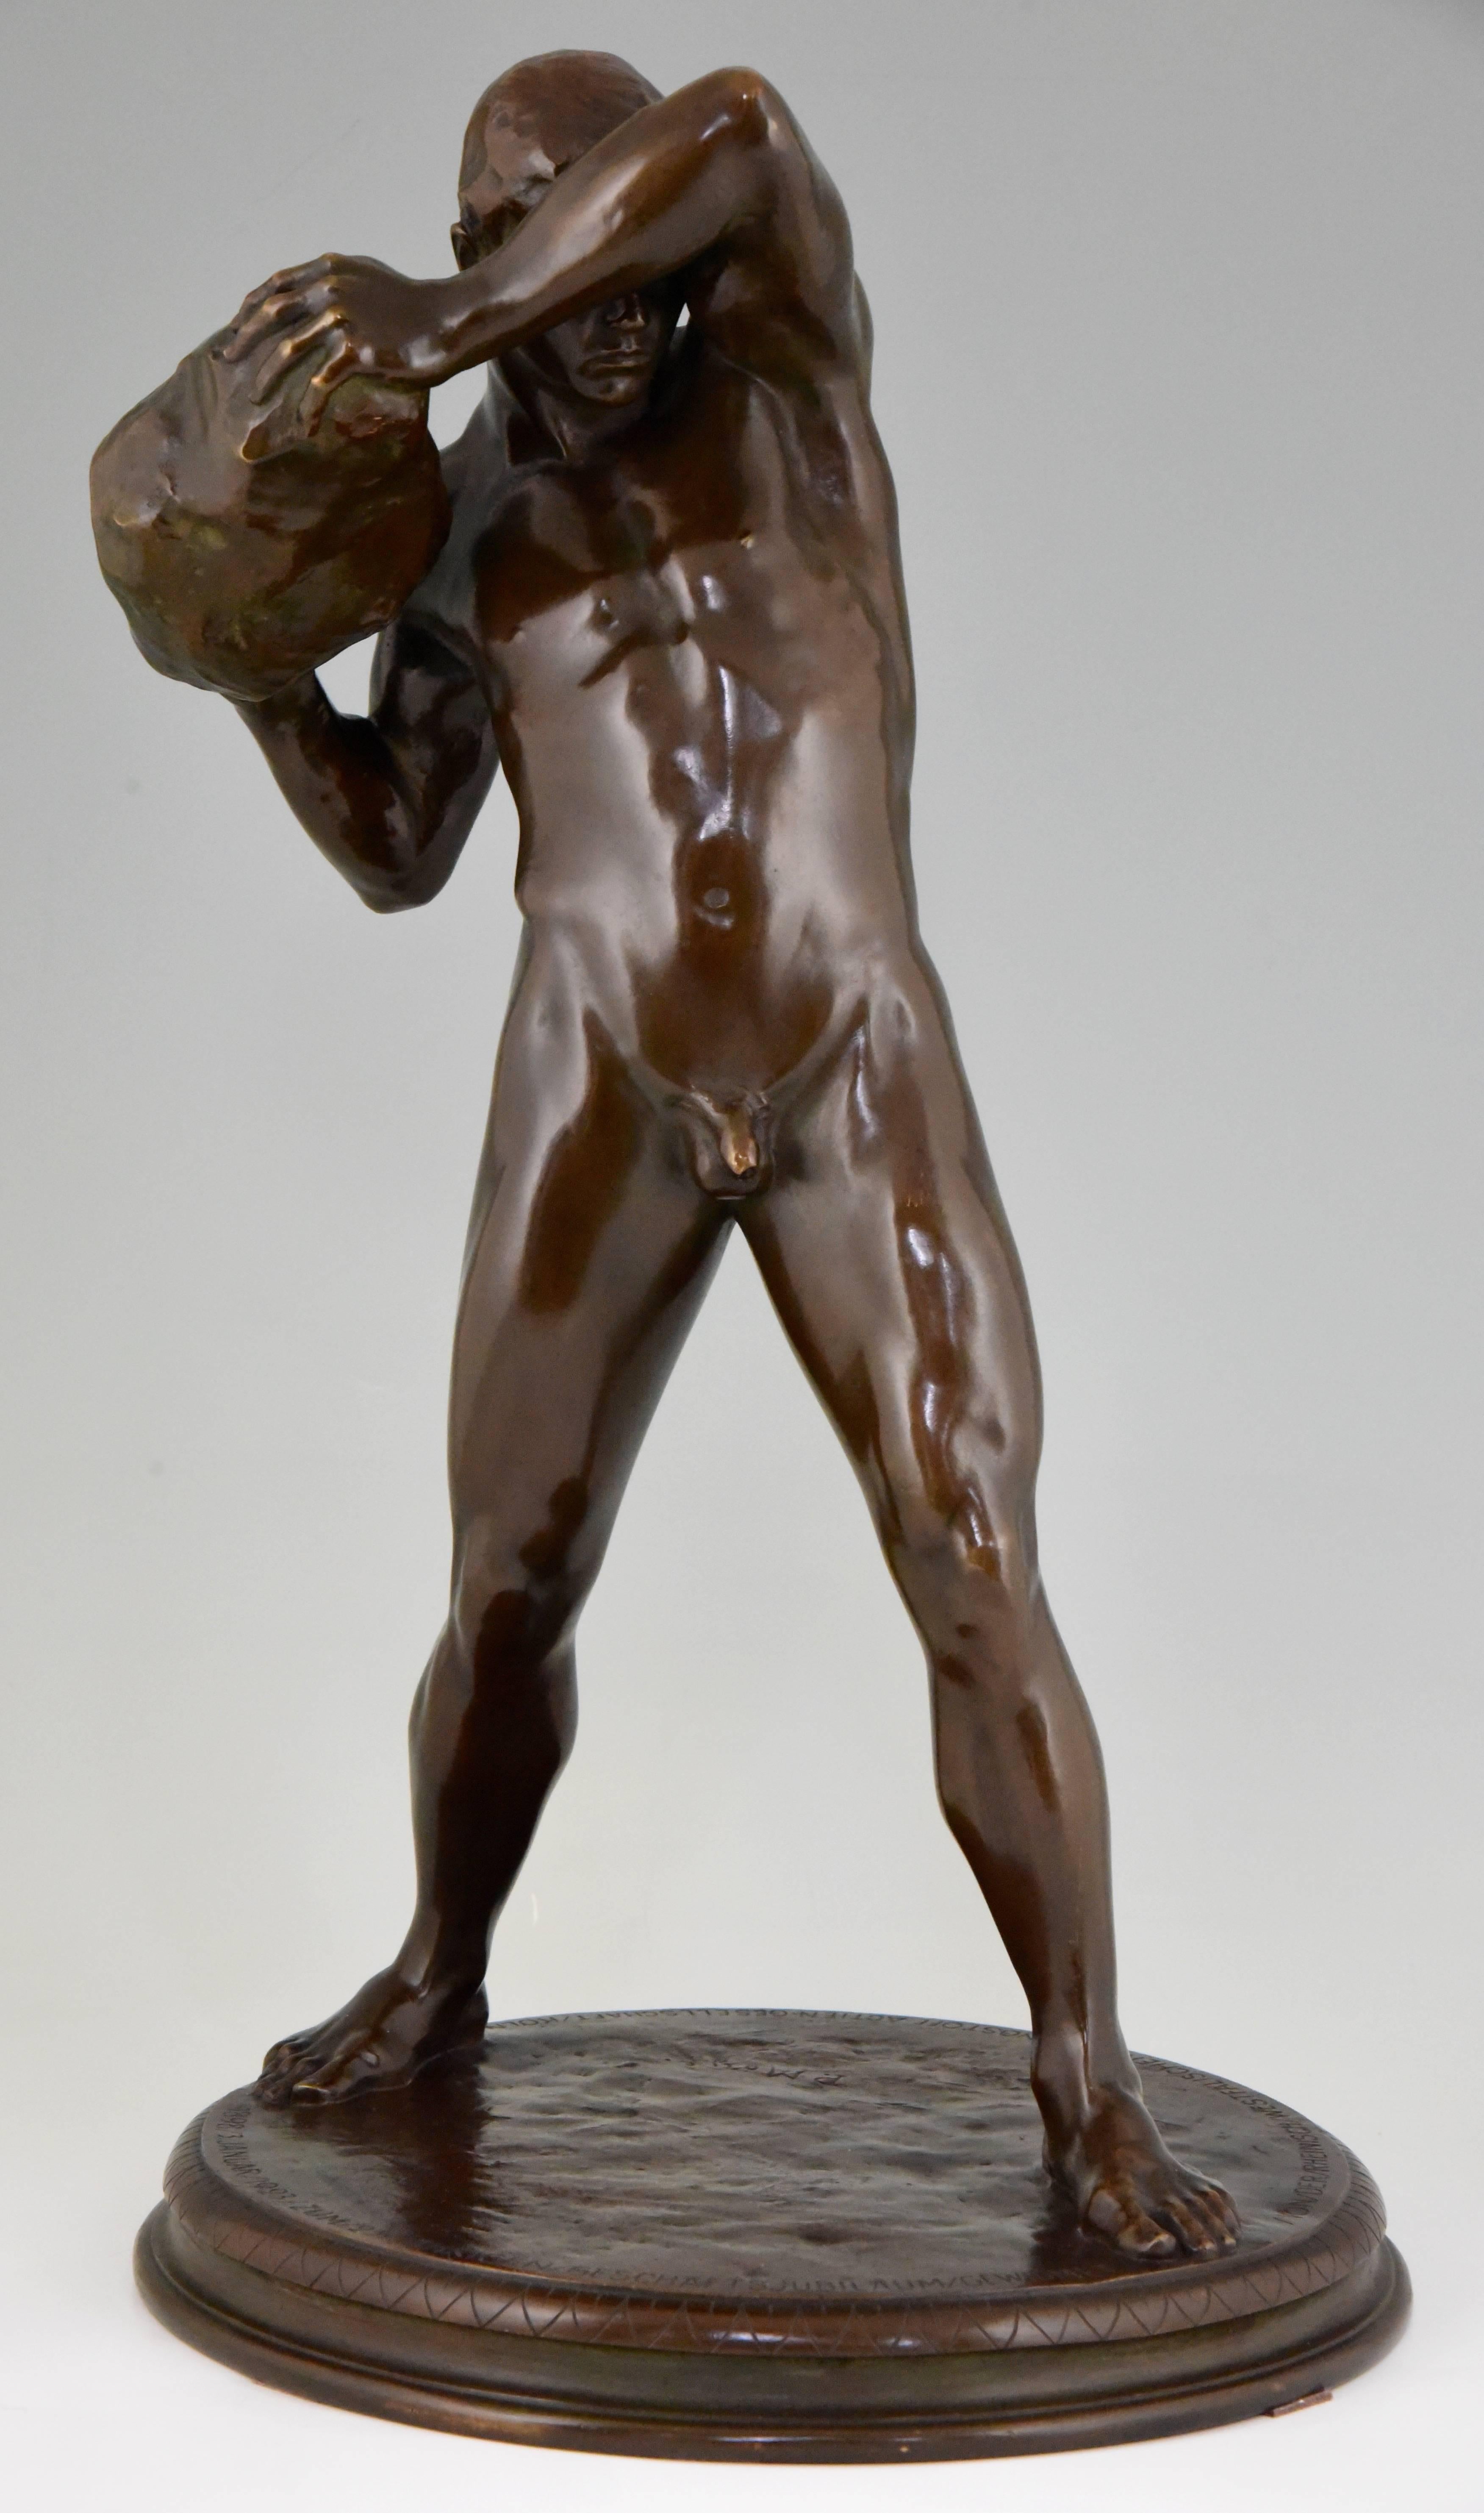 Beautiful quality antique bronze statue of an athletic male nude by the German artist Paul Moye (1877-1926). Signed, dated 1923 and with inscription.
 
Signature/marks: P. Moye
Style: Romantic
Date: 1923
Material: Patinated bronze
Origin: